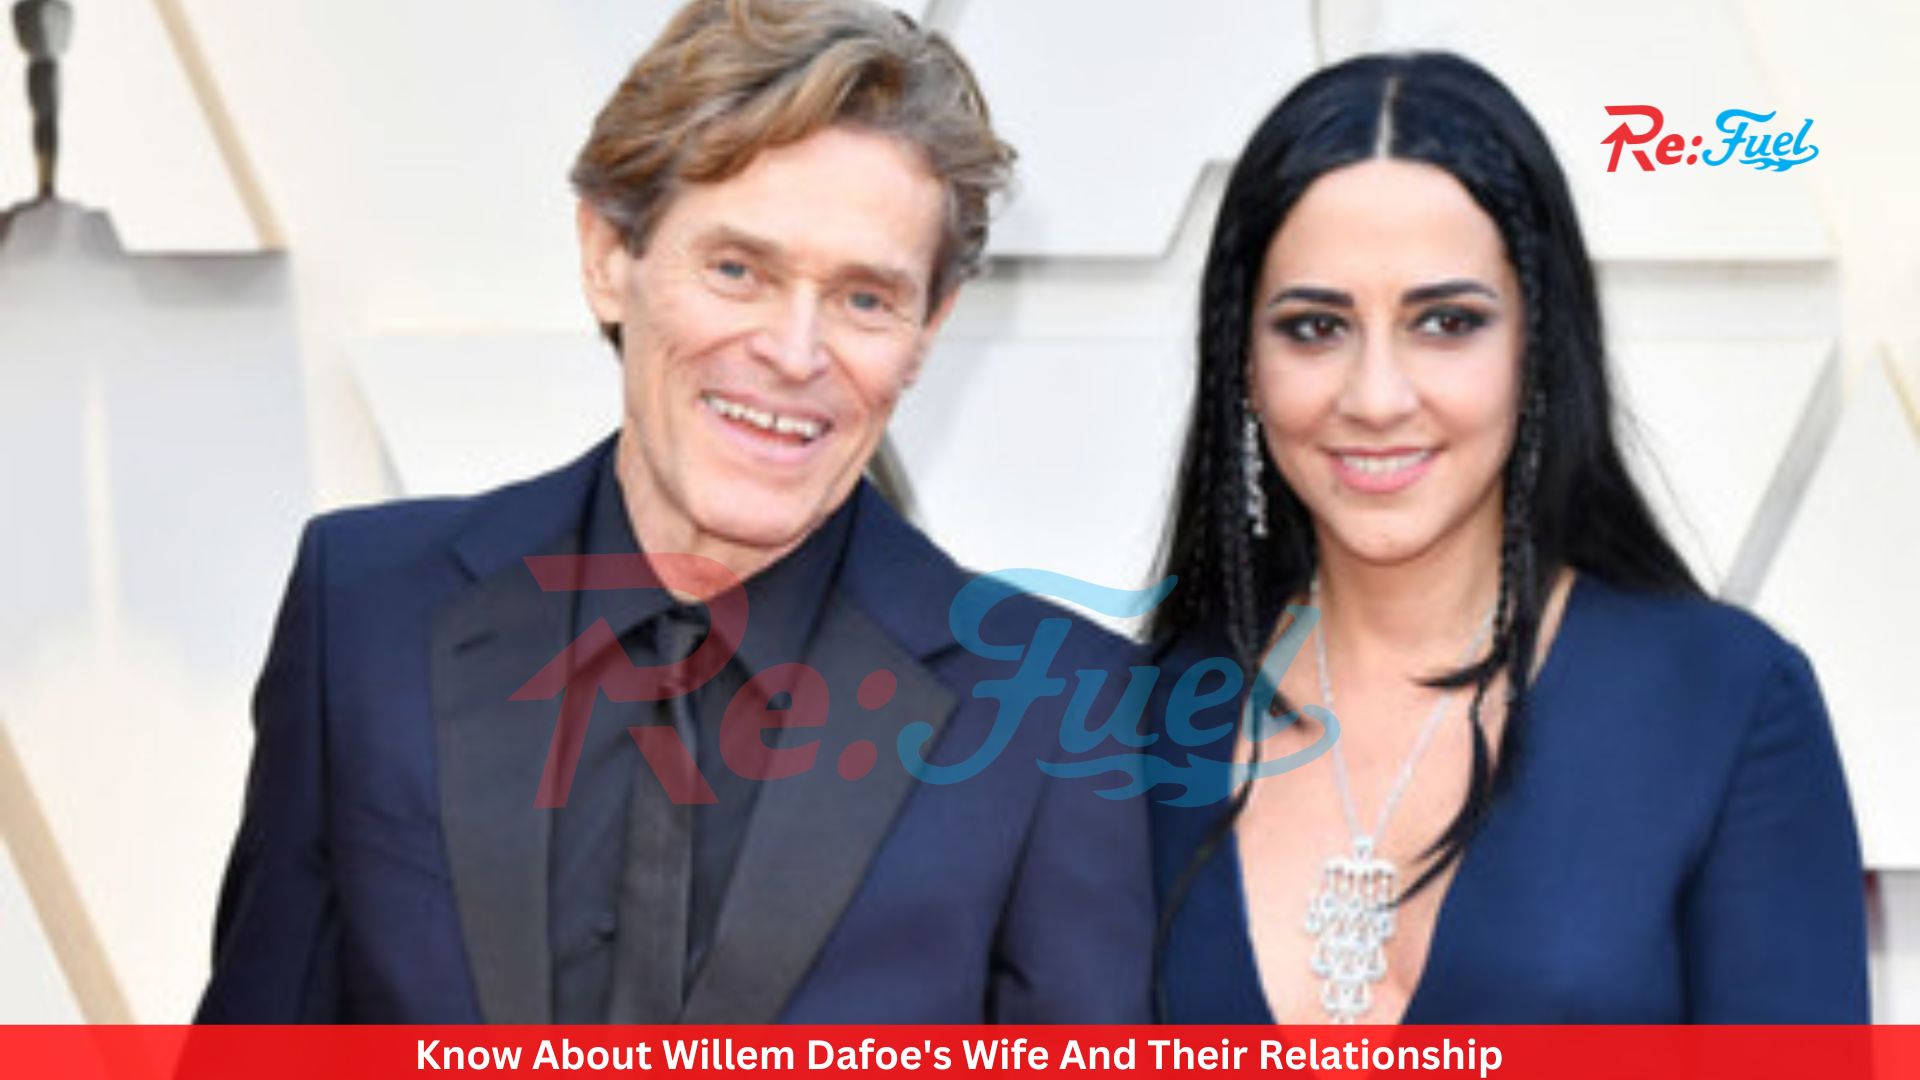 Know About Willem Dafoe's Wife And Their Relationship